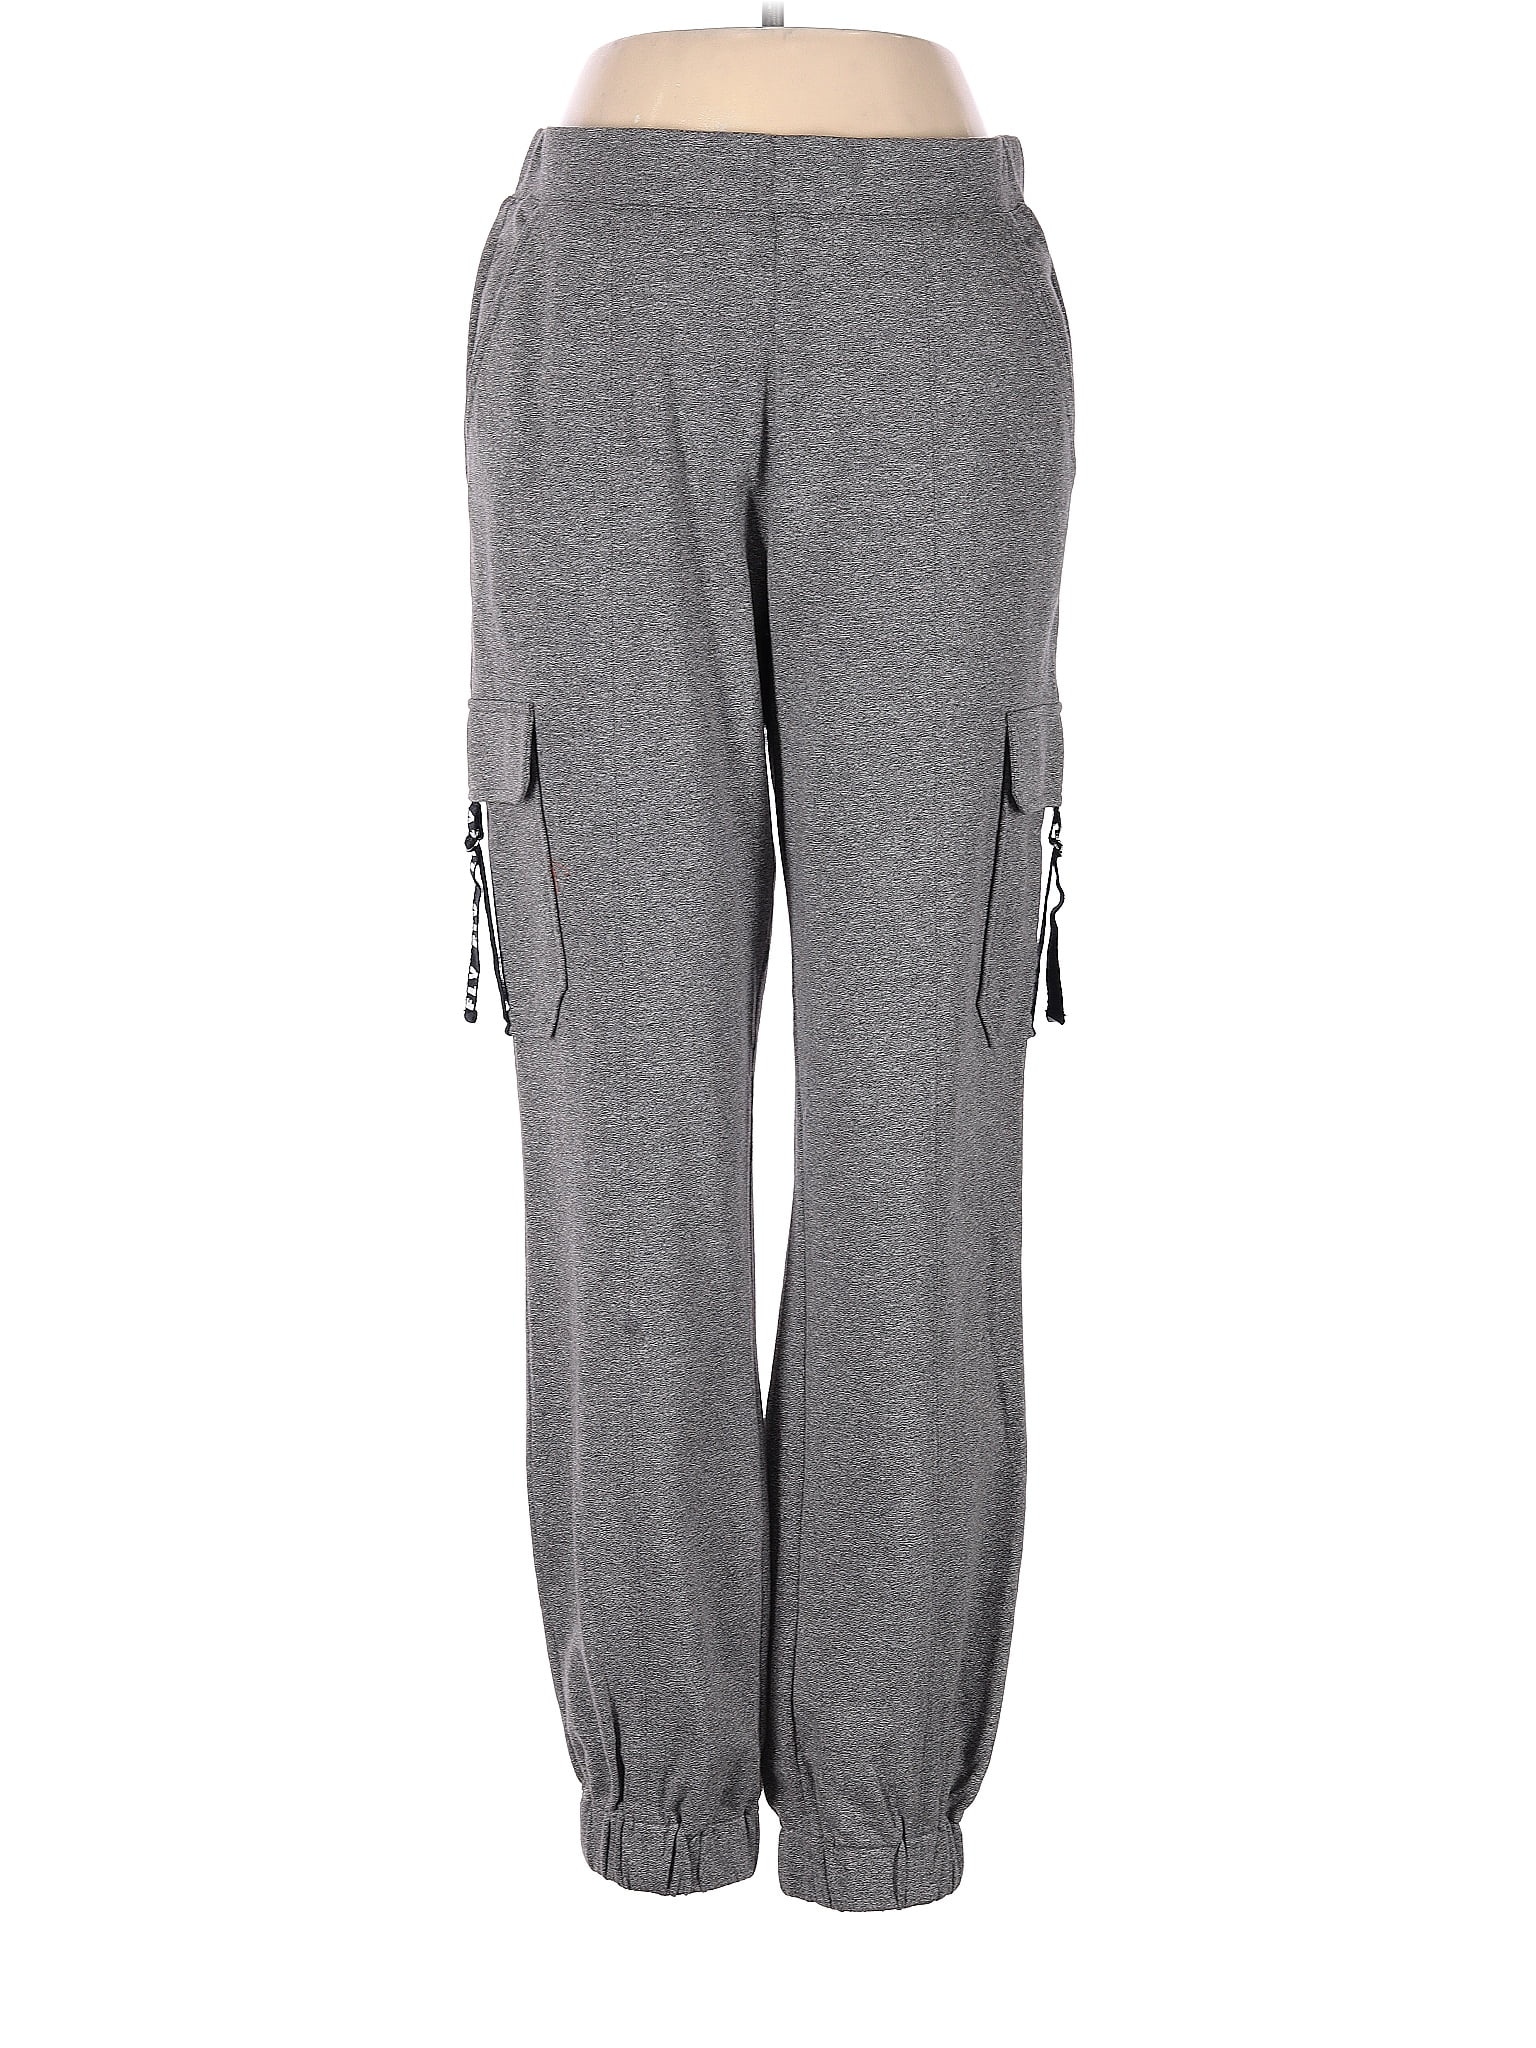 Gabrielle Union New York and Company Gray Cargo Pants Size S - 67% off ...